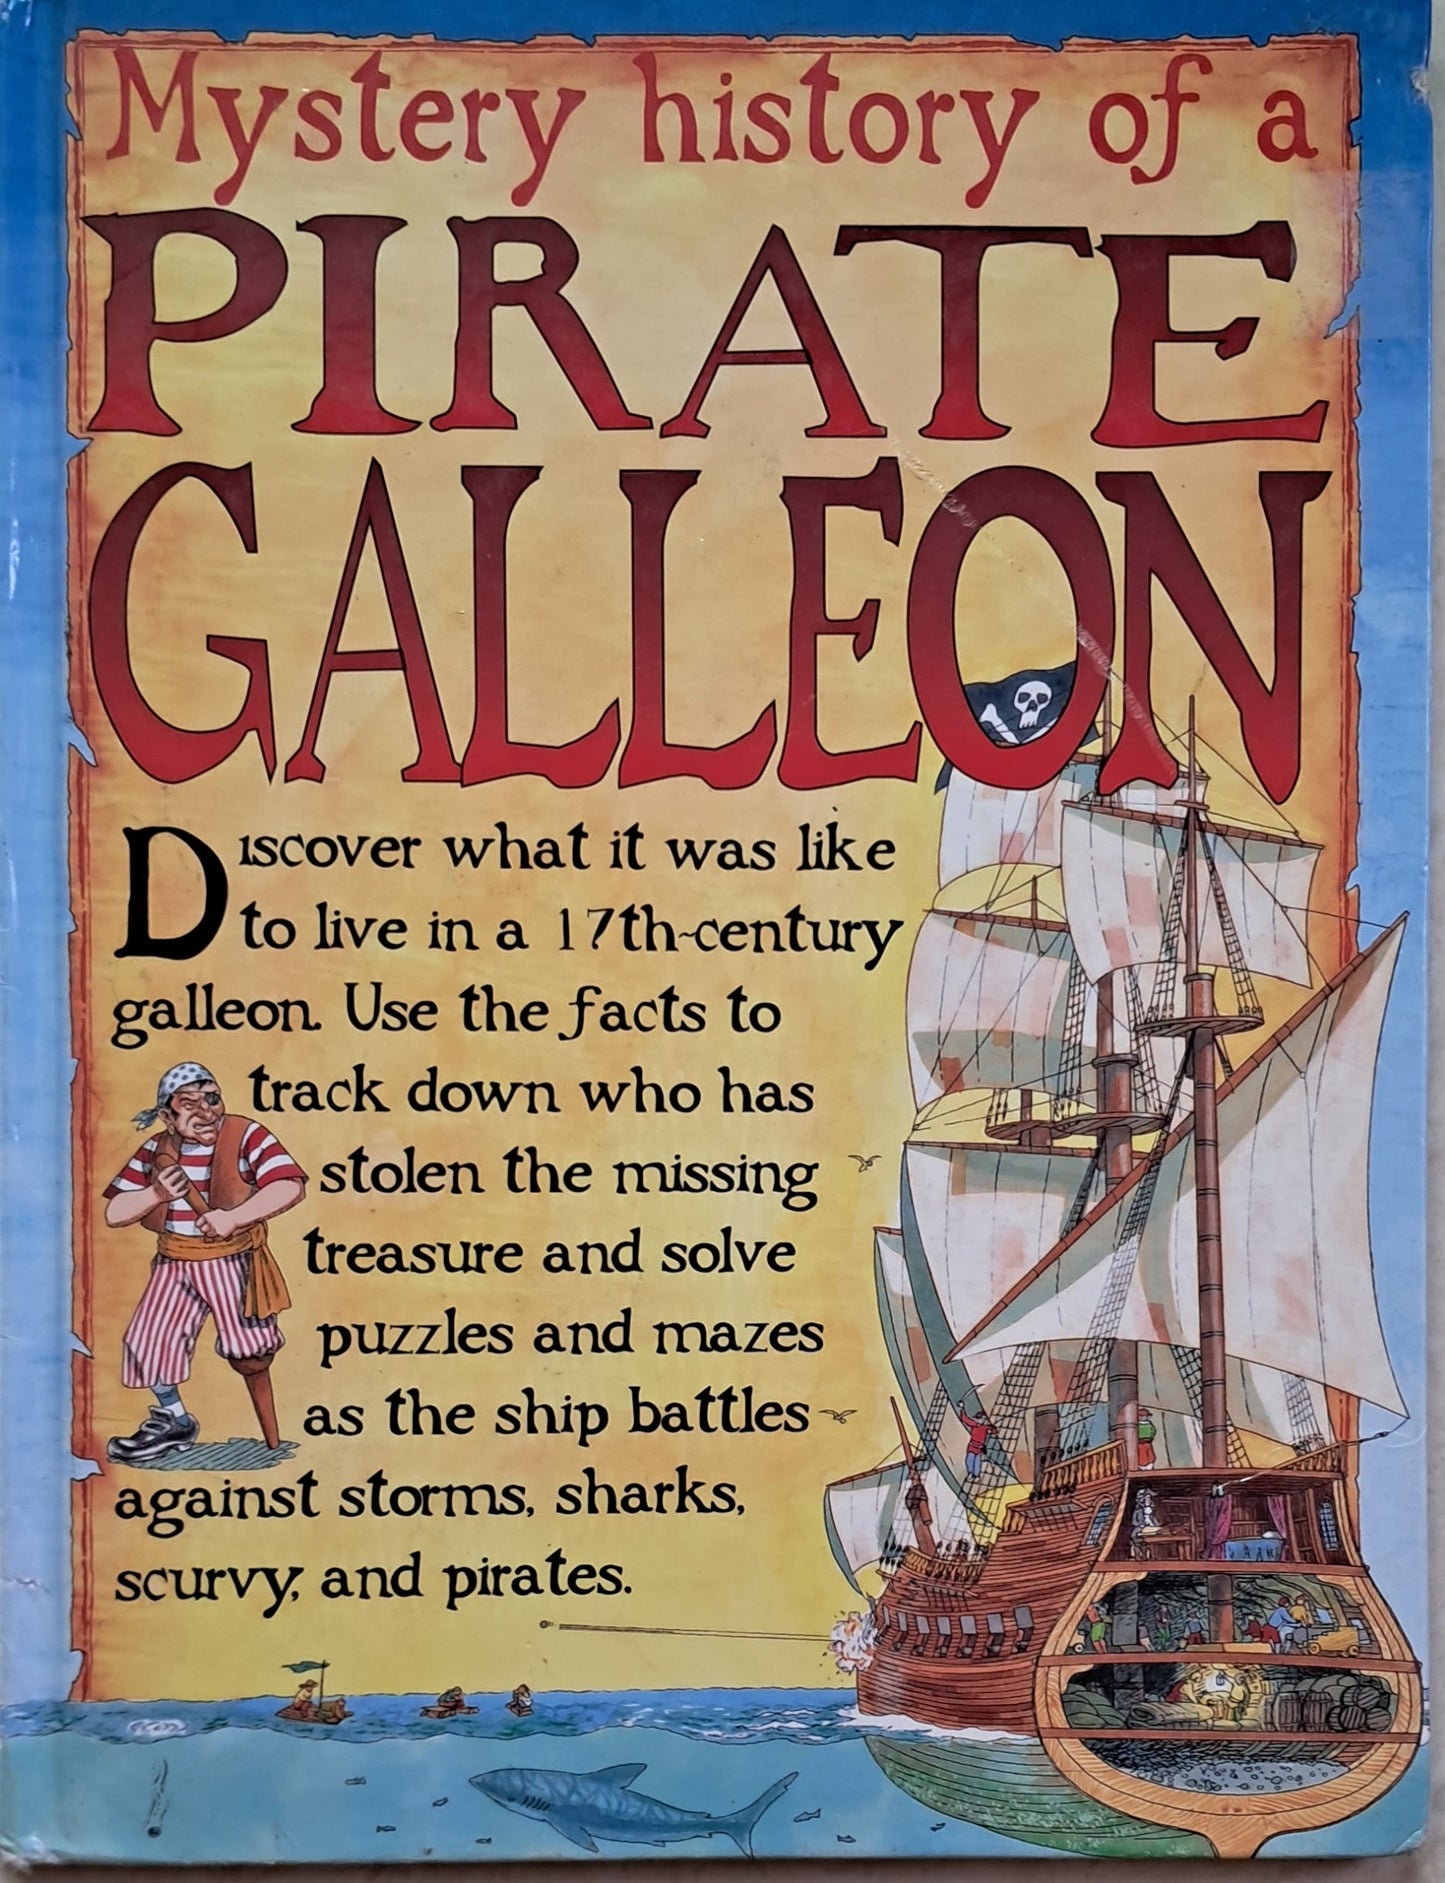 Mystery history of a Pirate Galleon